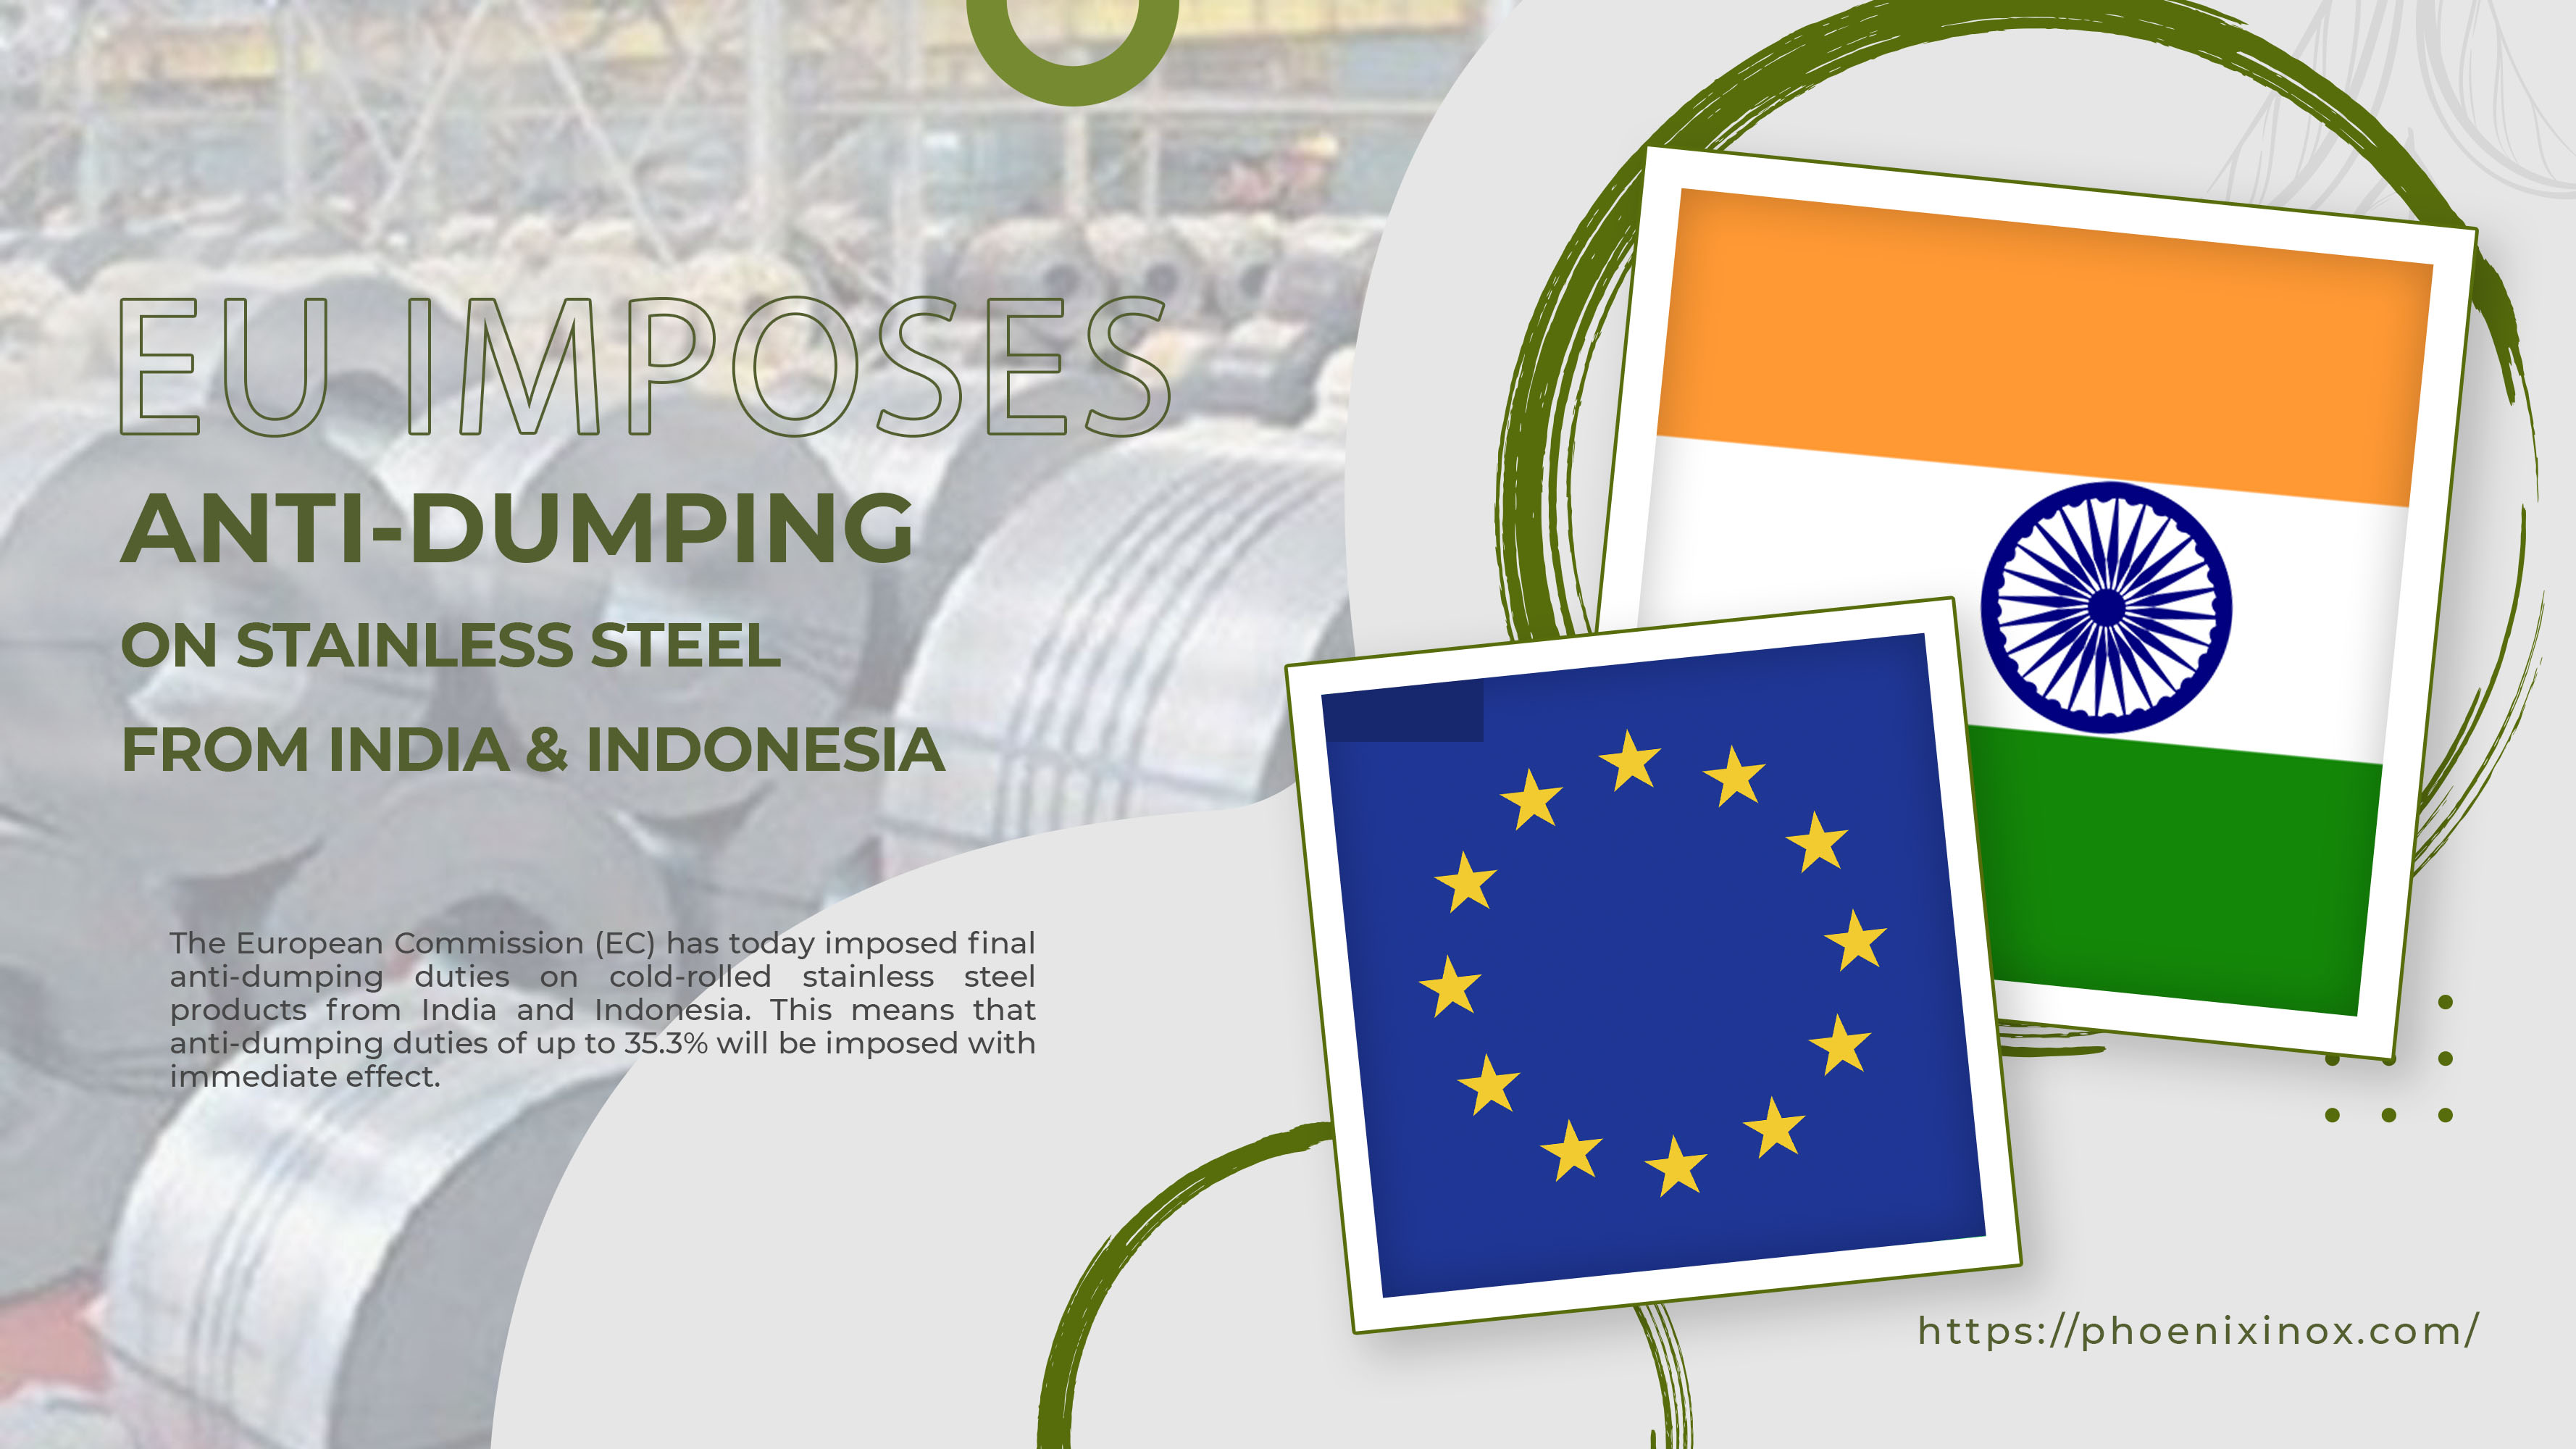 EU IMPOSES ANTI-DUMPING ON STAINLESS STEEL FROM INDIA & INDONESIA